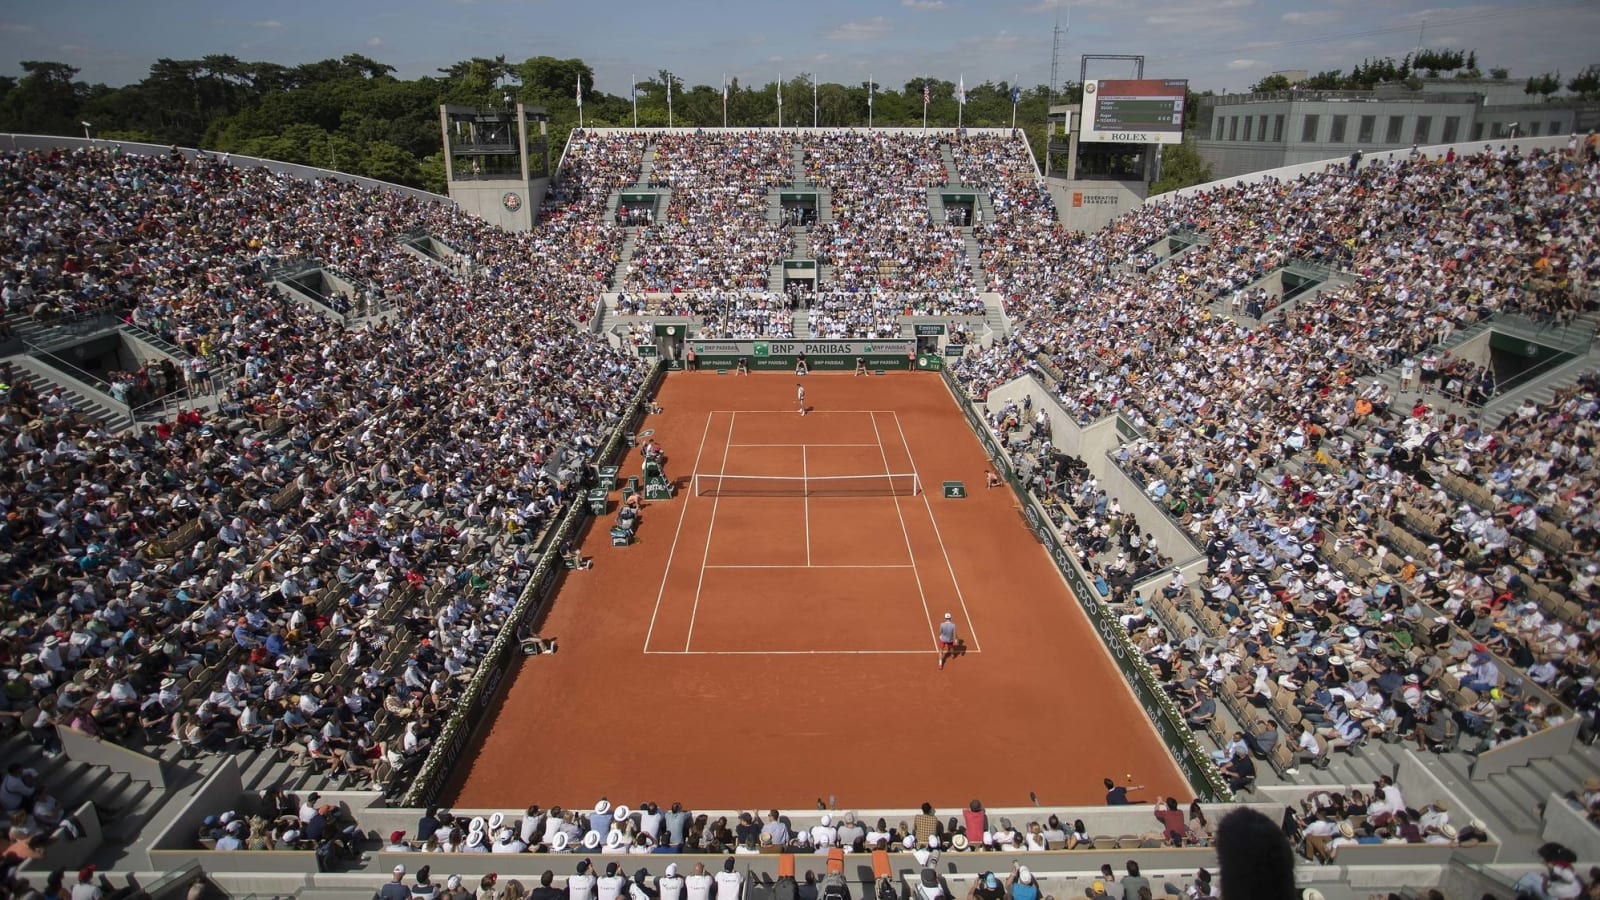 French Open plans to have fans in stands